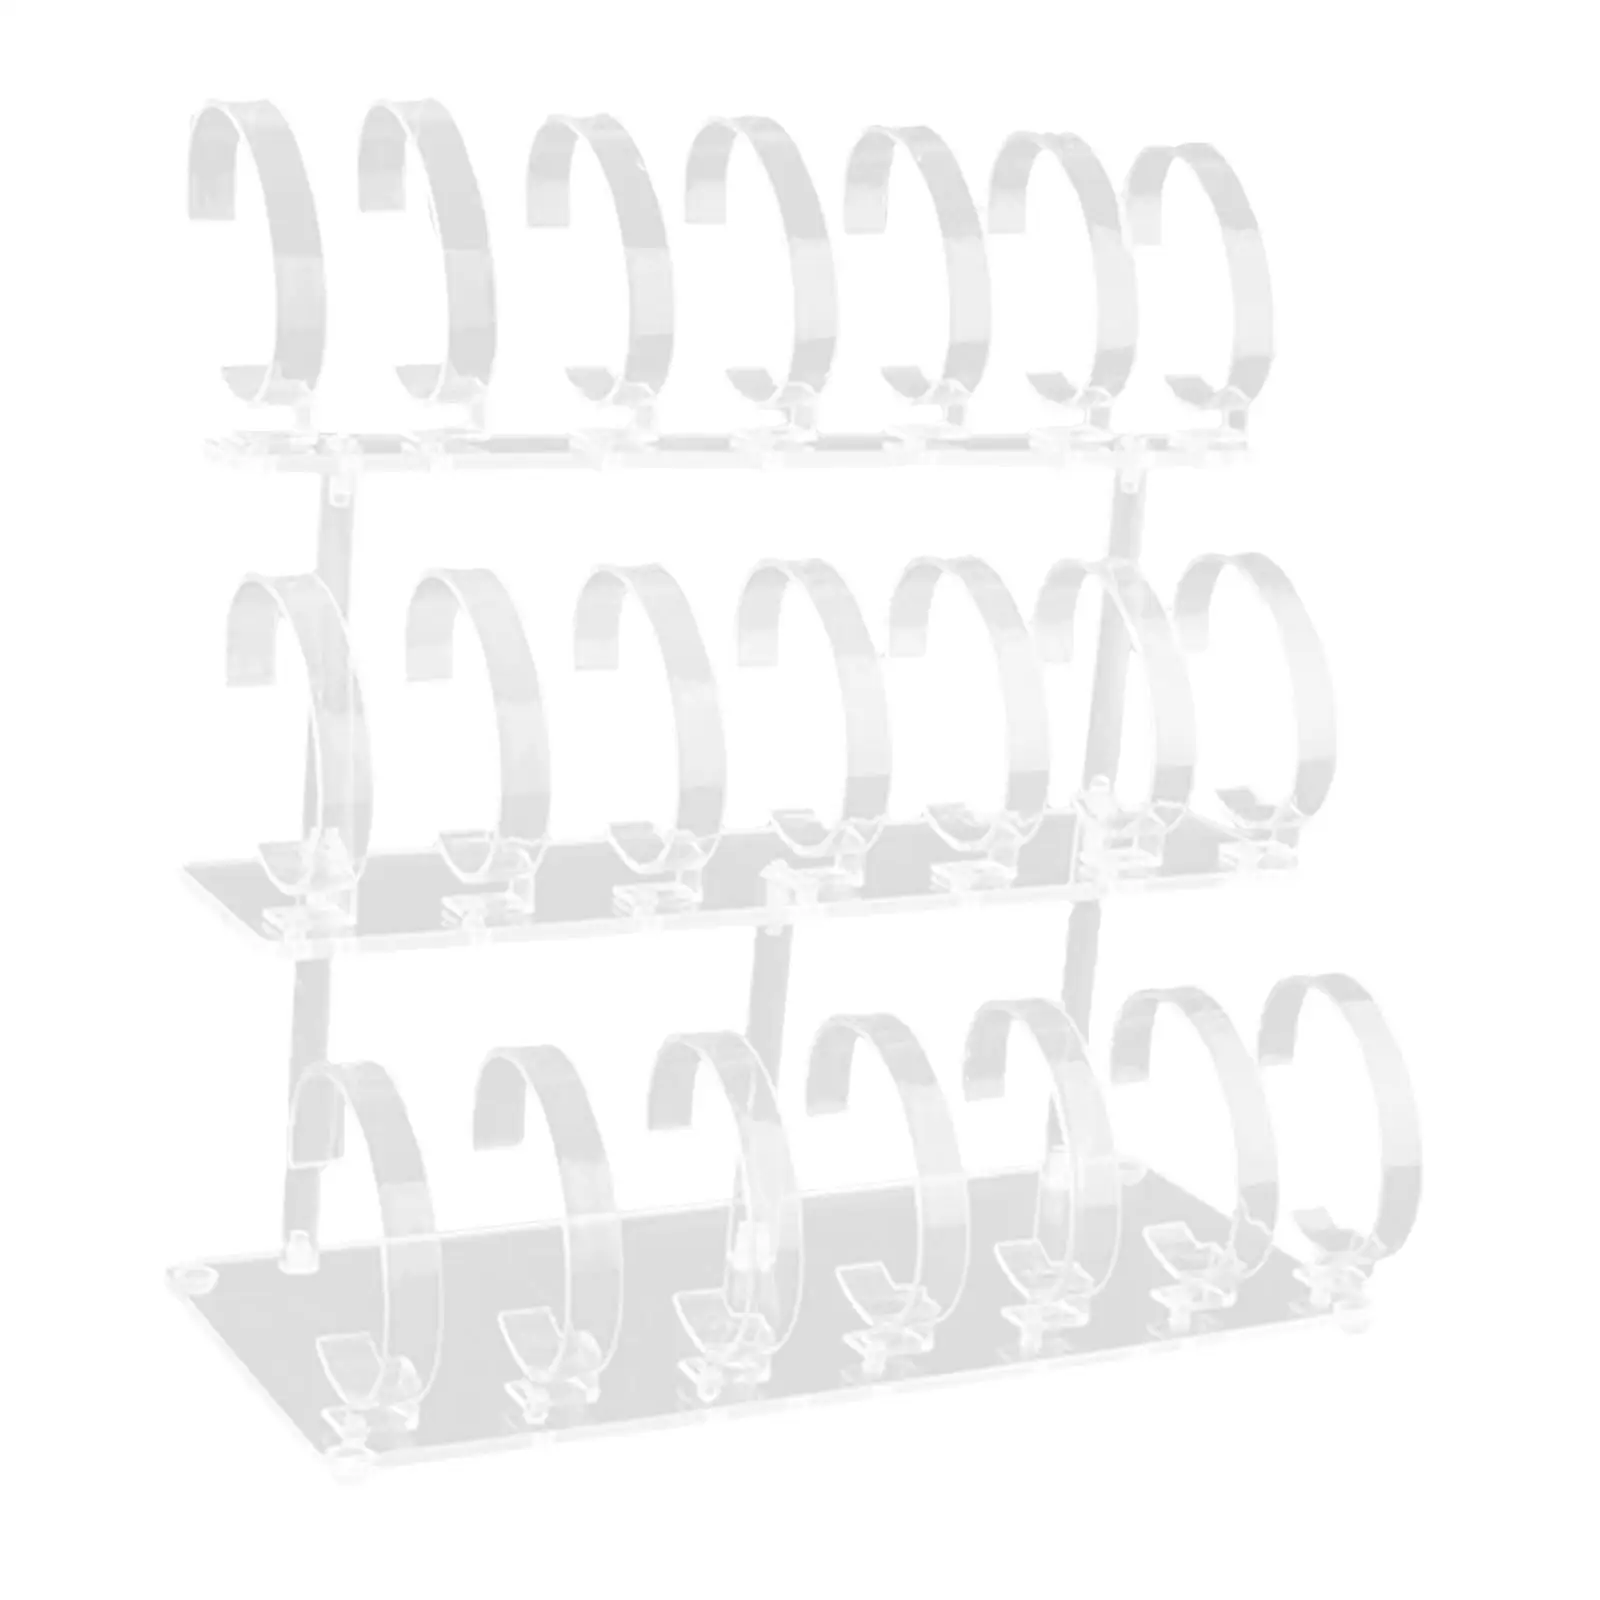 Show Case Stand Showcases Retail Use Durable Universal Transparent High Capacity Home Decor Wrist Watch Displays Rack Holder